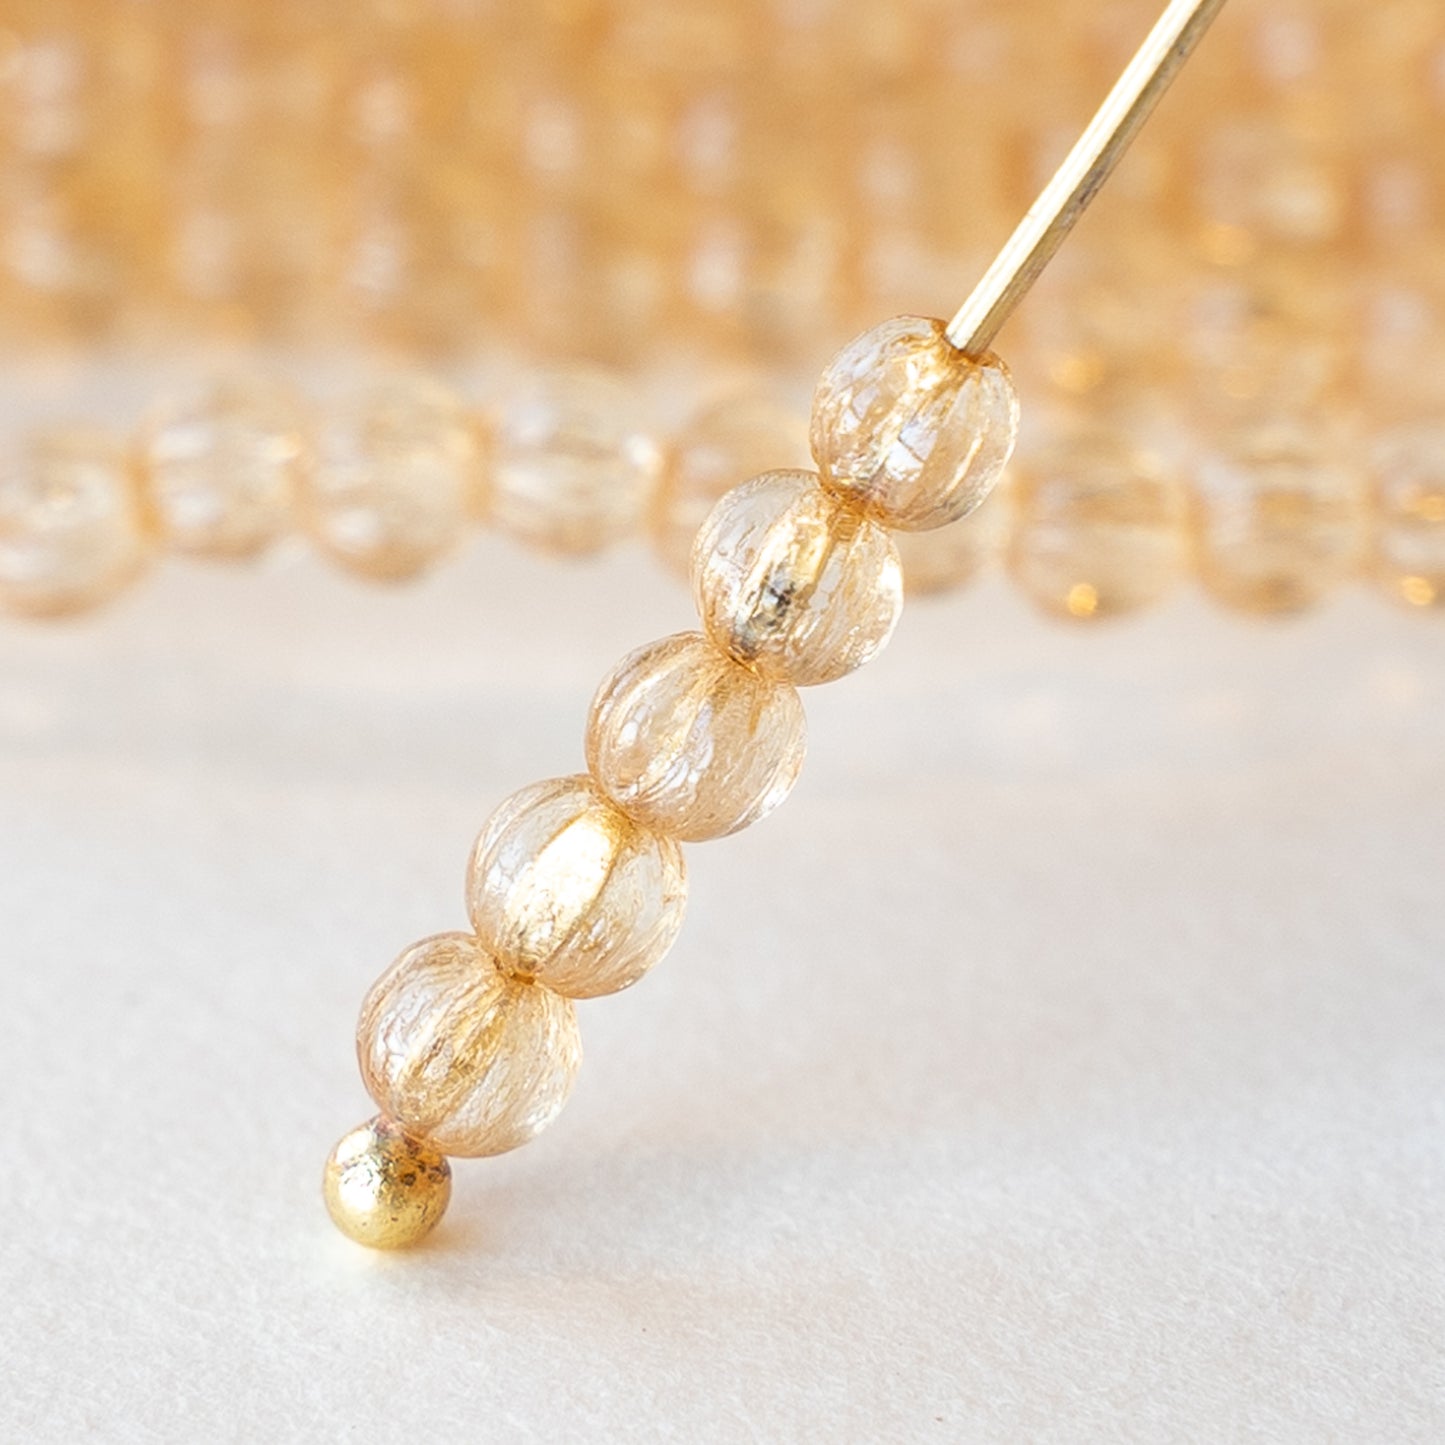 3mm Melon Beads - Champagne Luster - 100 Beads